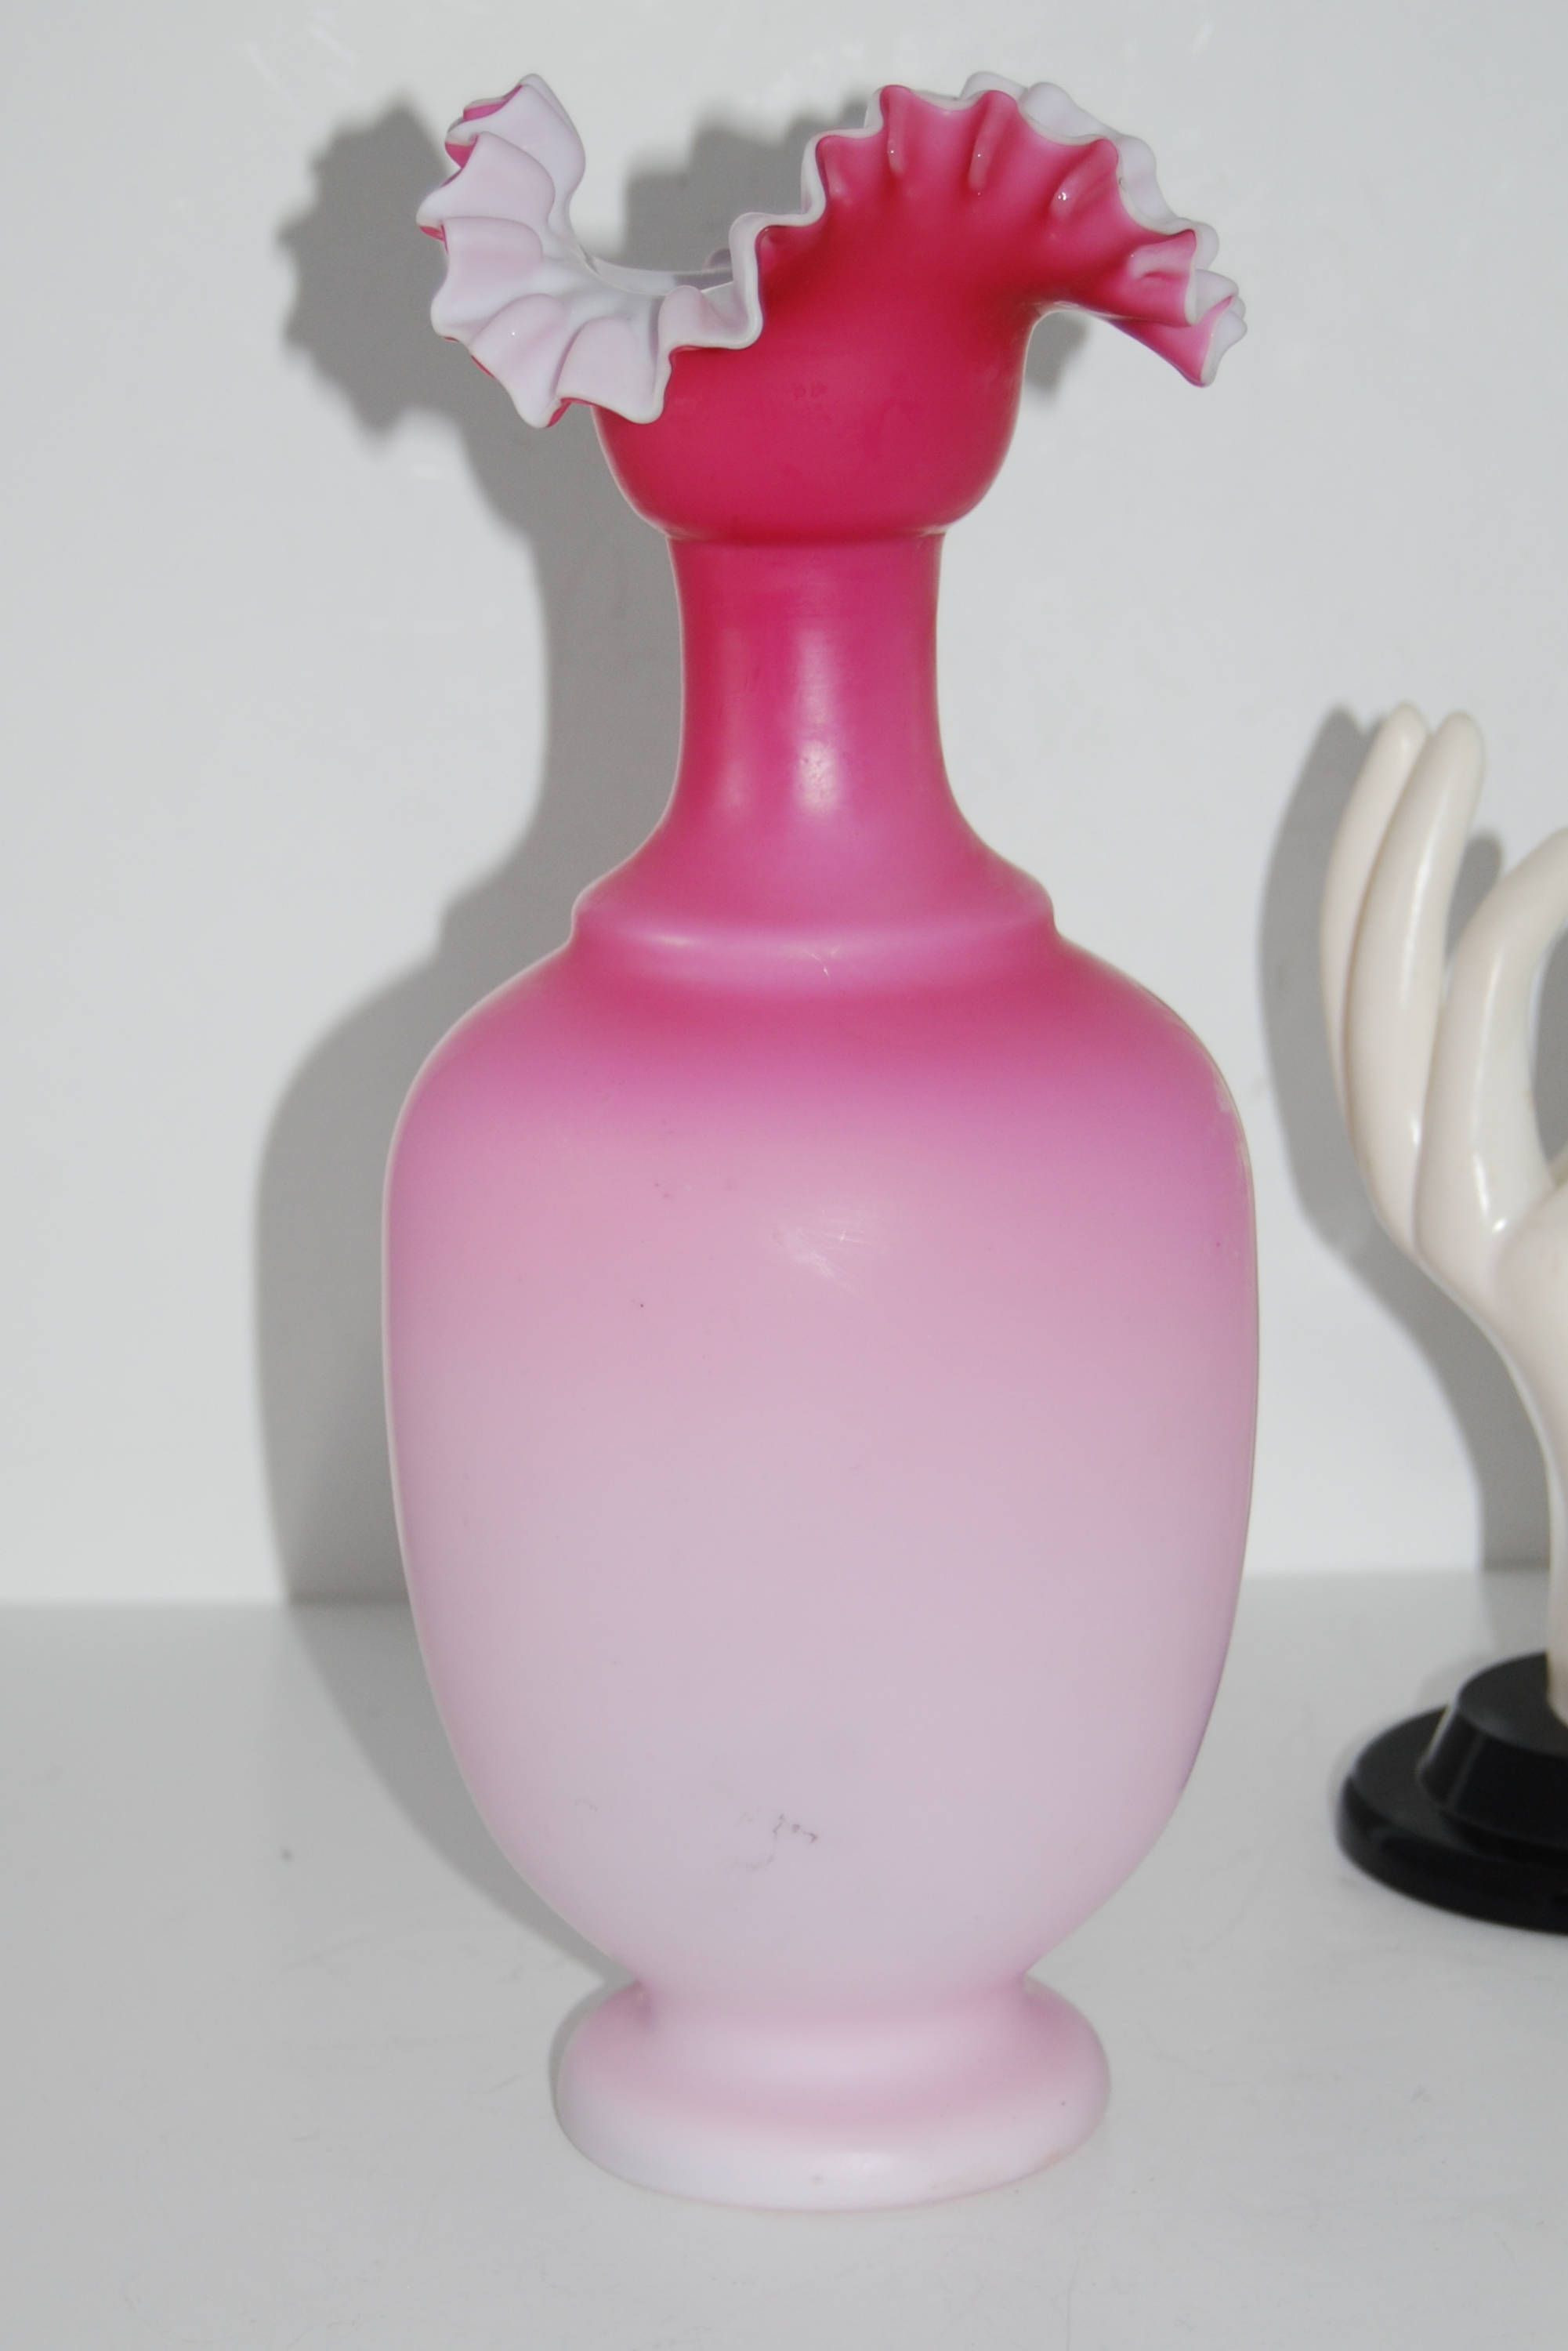 15 Unique Tall White Vases Sale 2024 free download tall white vases sale of antique victorian glass vase pink white satin cased tall 11 25 throughout antique victorian glass vase pink white satin cased tall 11 25 pontil mark by savesitall on